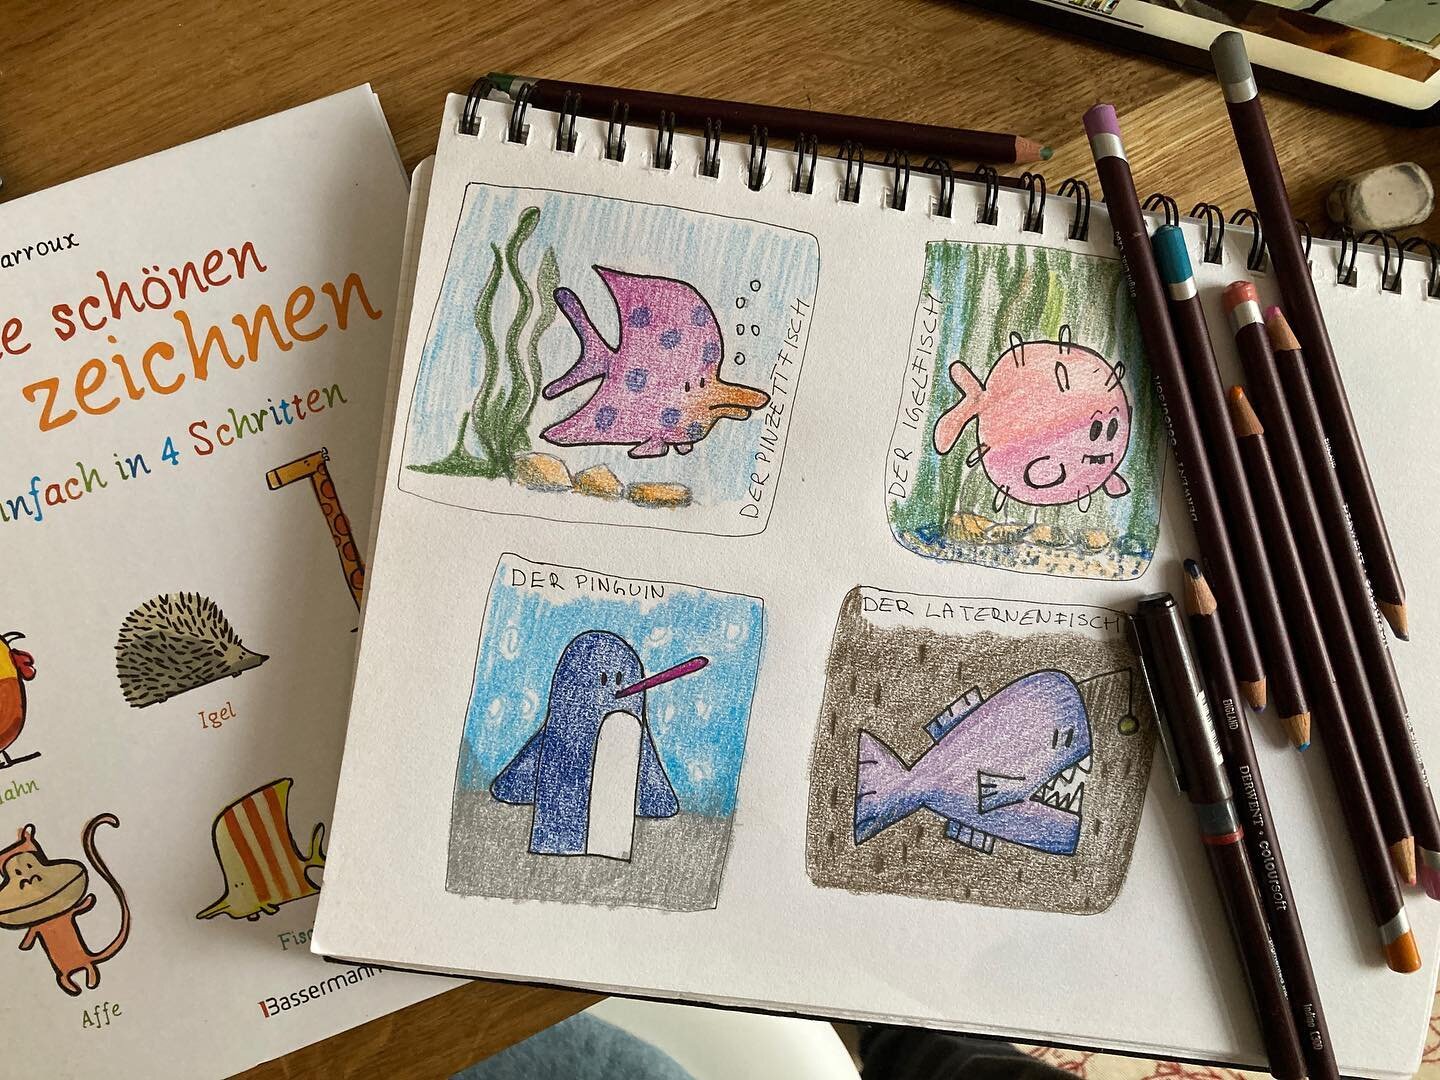 Covid &amp; self isolation. Passing time teaching via video call how to draw fishes and other animals&hellip; 

#covid #drawing #fun